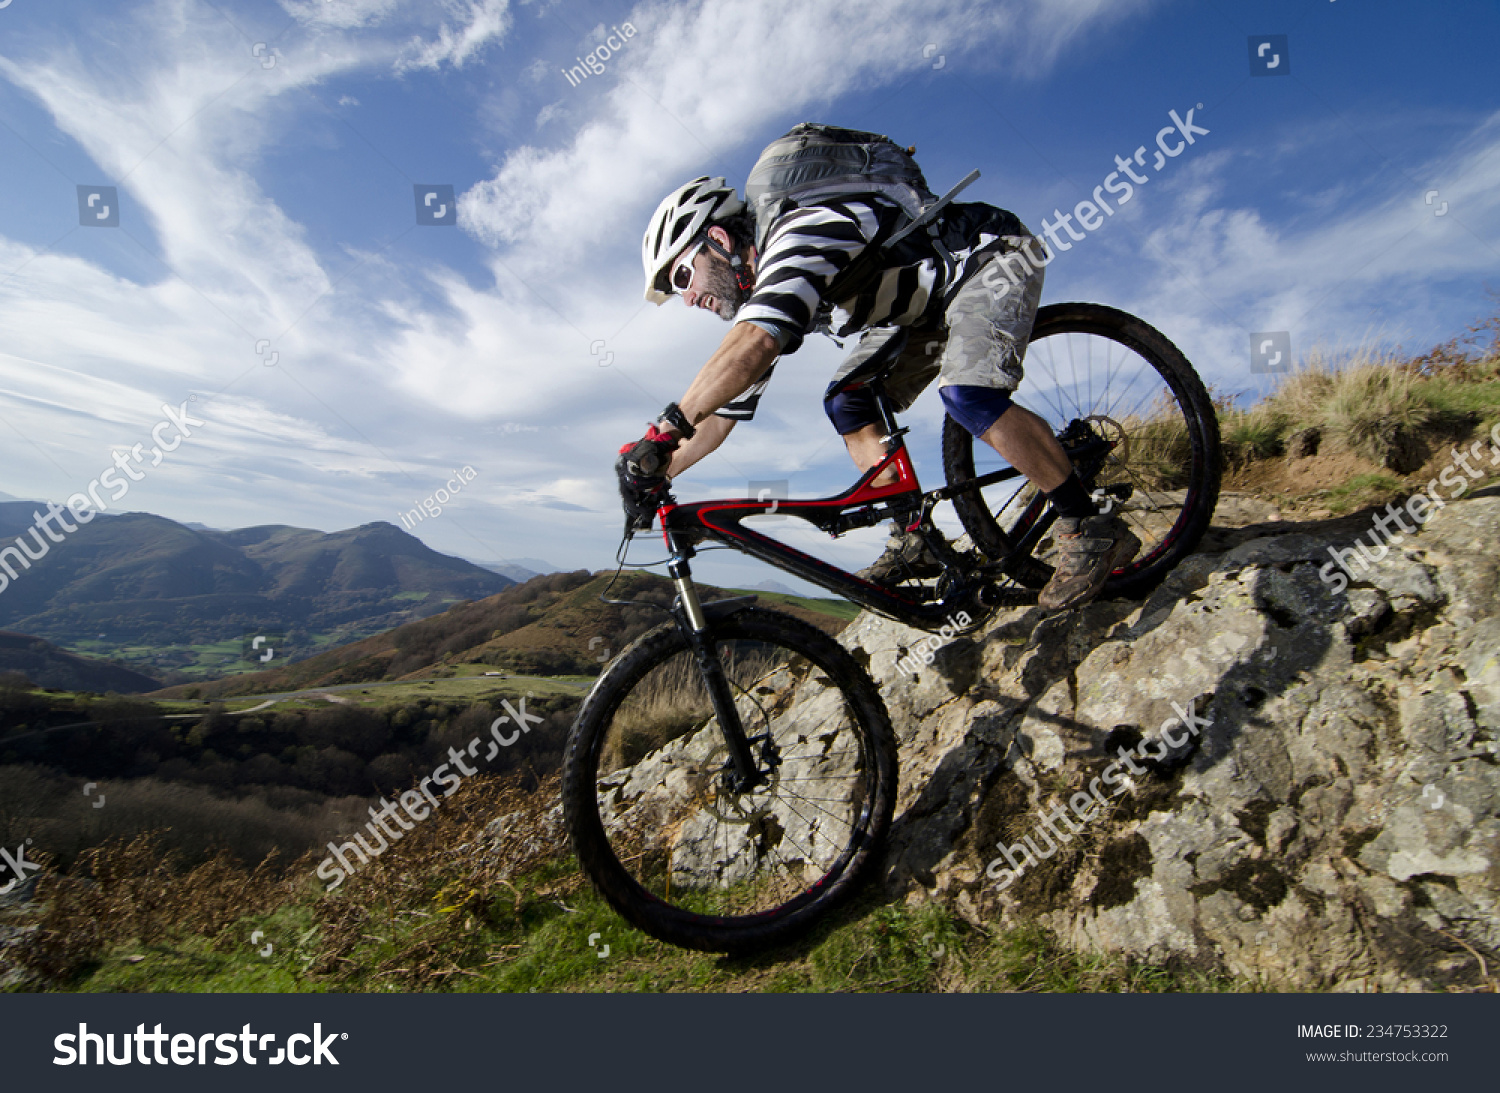 Rider in action at Freestyle Mountain Bike Session #234753322